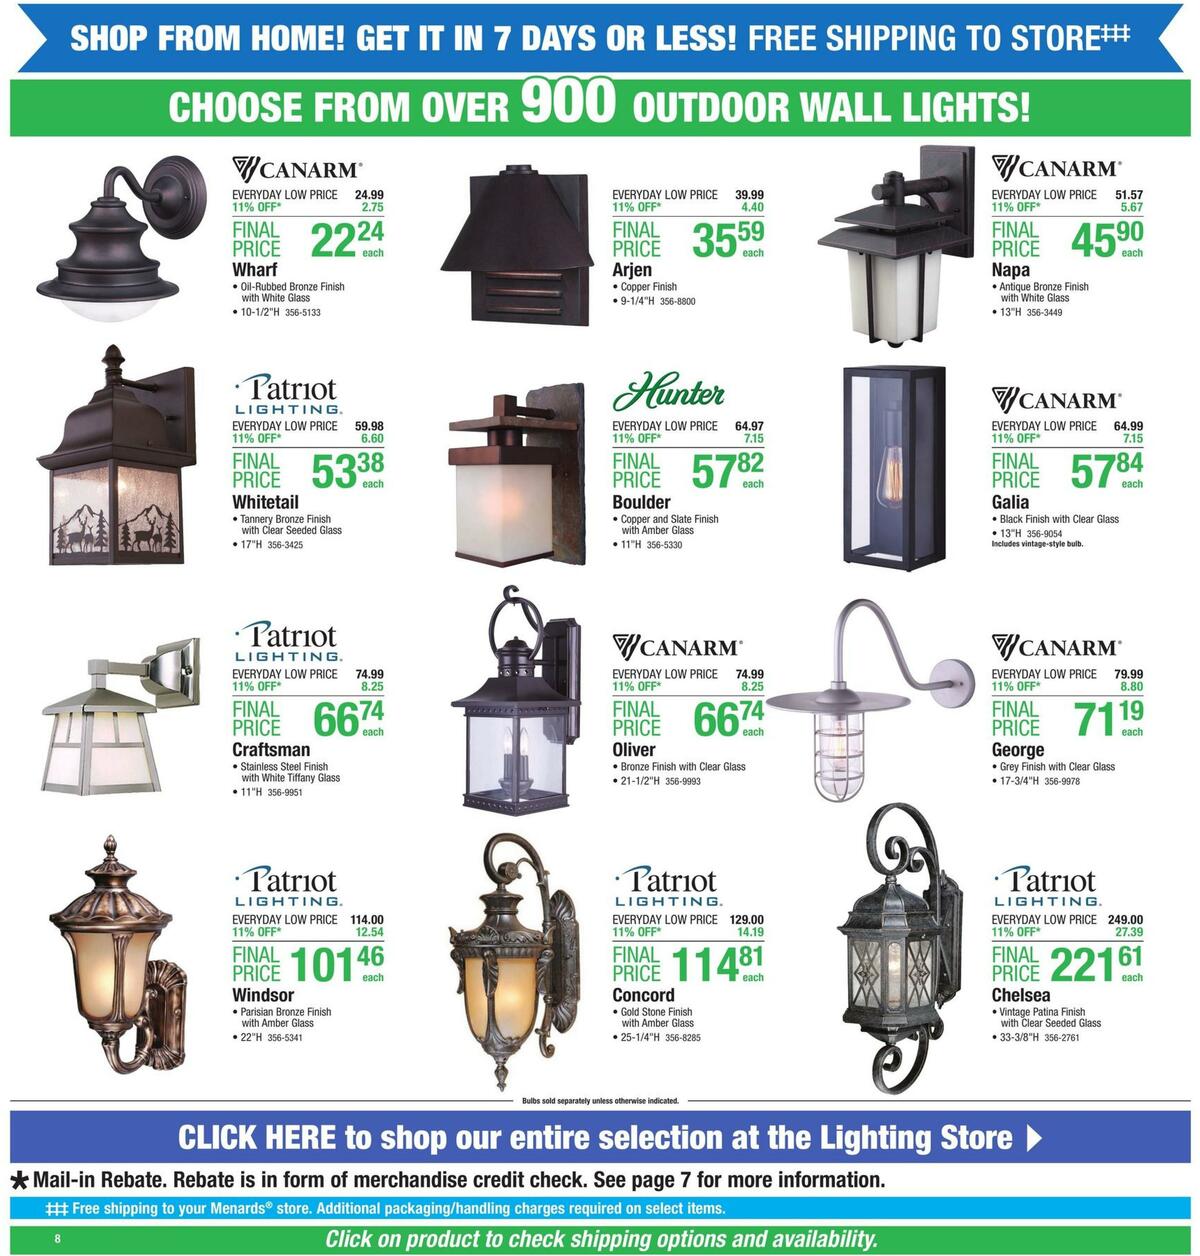 Menards Lighting and Fans Sale Weekly Ads & Special Buys for May 17 - Page 8